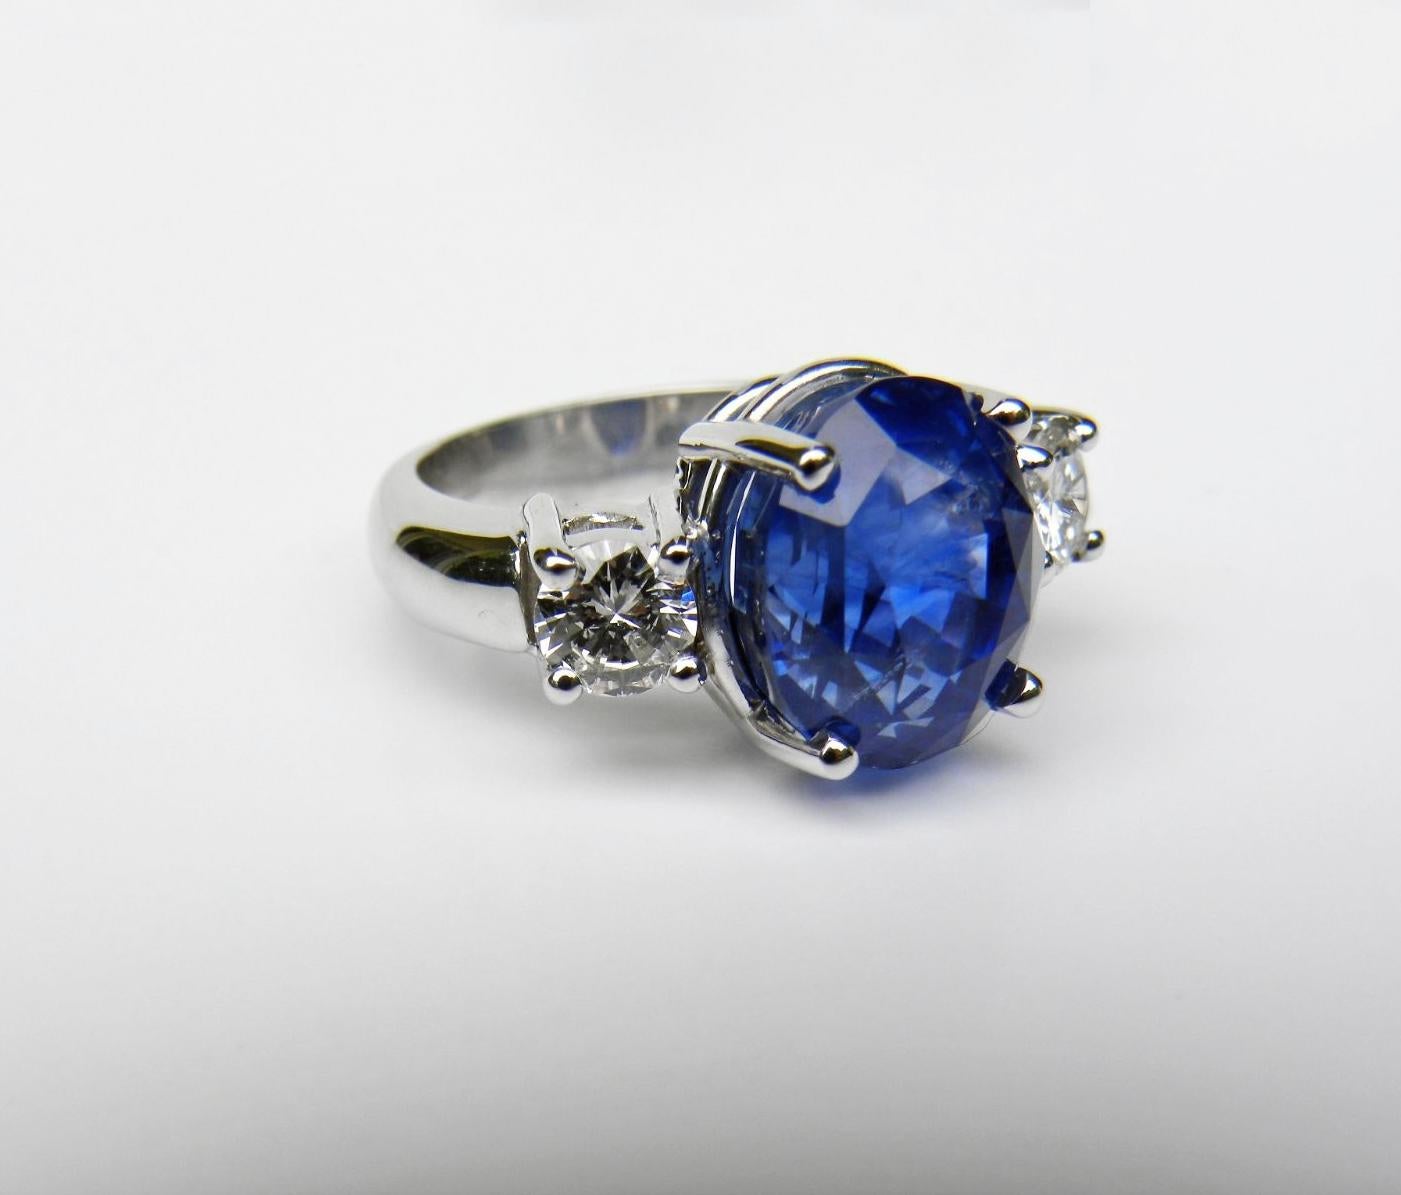 GIA Certified Untreated 11.00 Carat Cornflower Blue Sapphire Diamond Three Stone Engagement Ring 18K
Primary Stones: Natural Untreated Ceylon Sapphire
Total Sapphire Weight :  10.23 Carats HUGE
Sapphire Measurements: 11.81mm x 10.05mm x